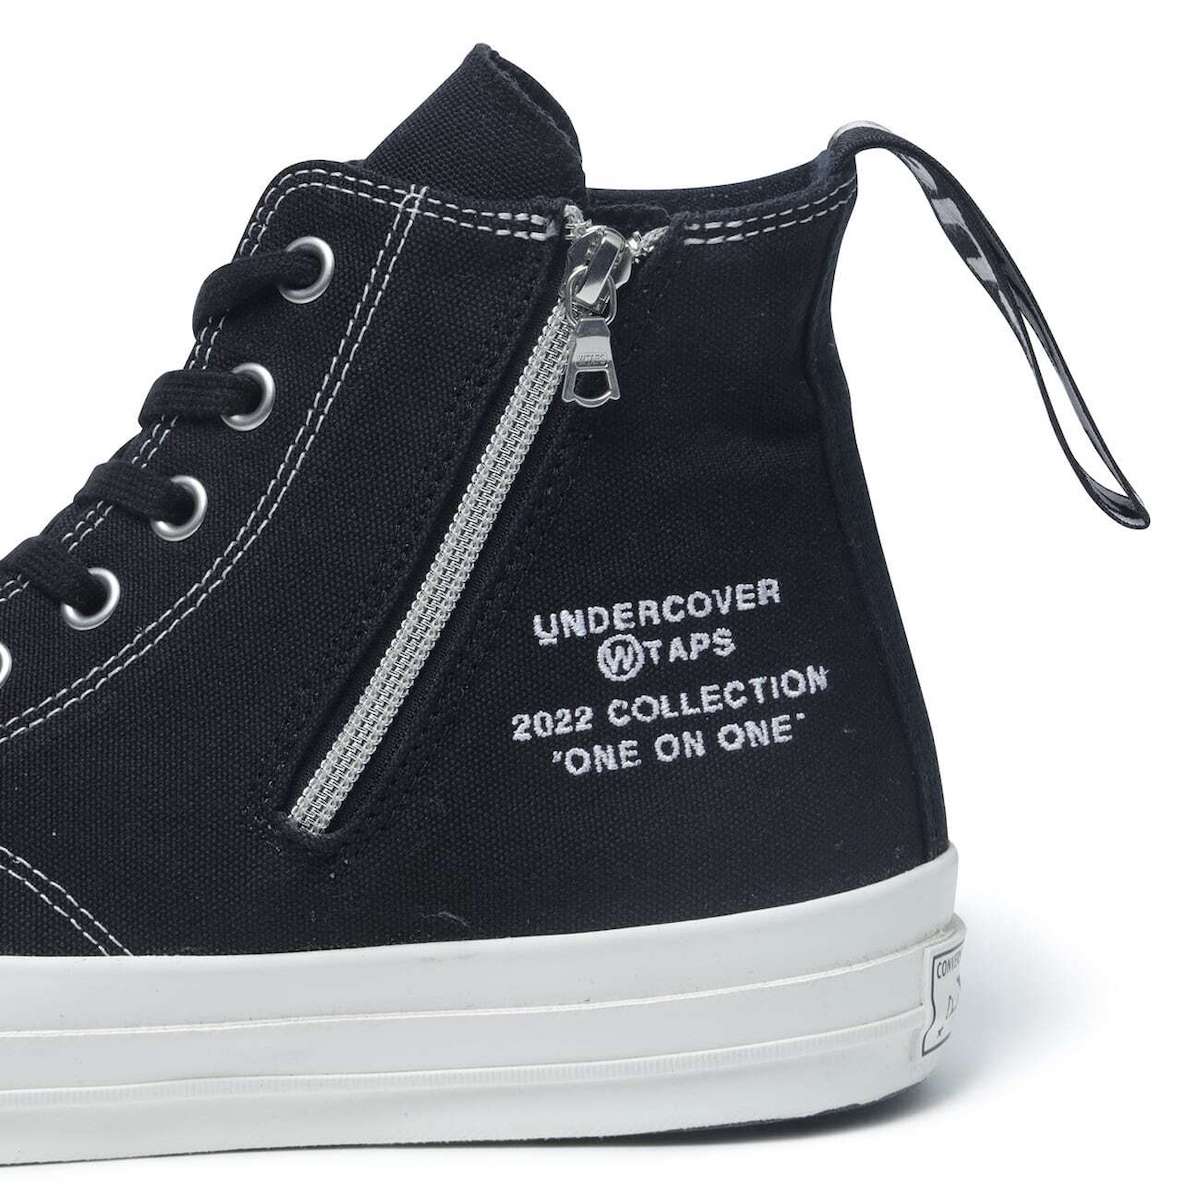 wtaps x undercover x converse chuck 70 high one on one 6